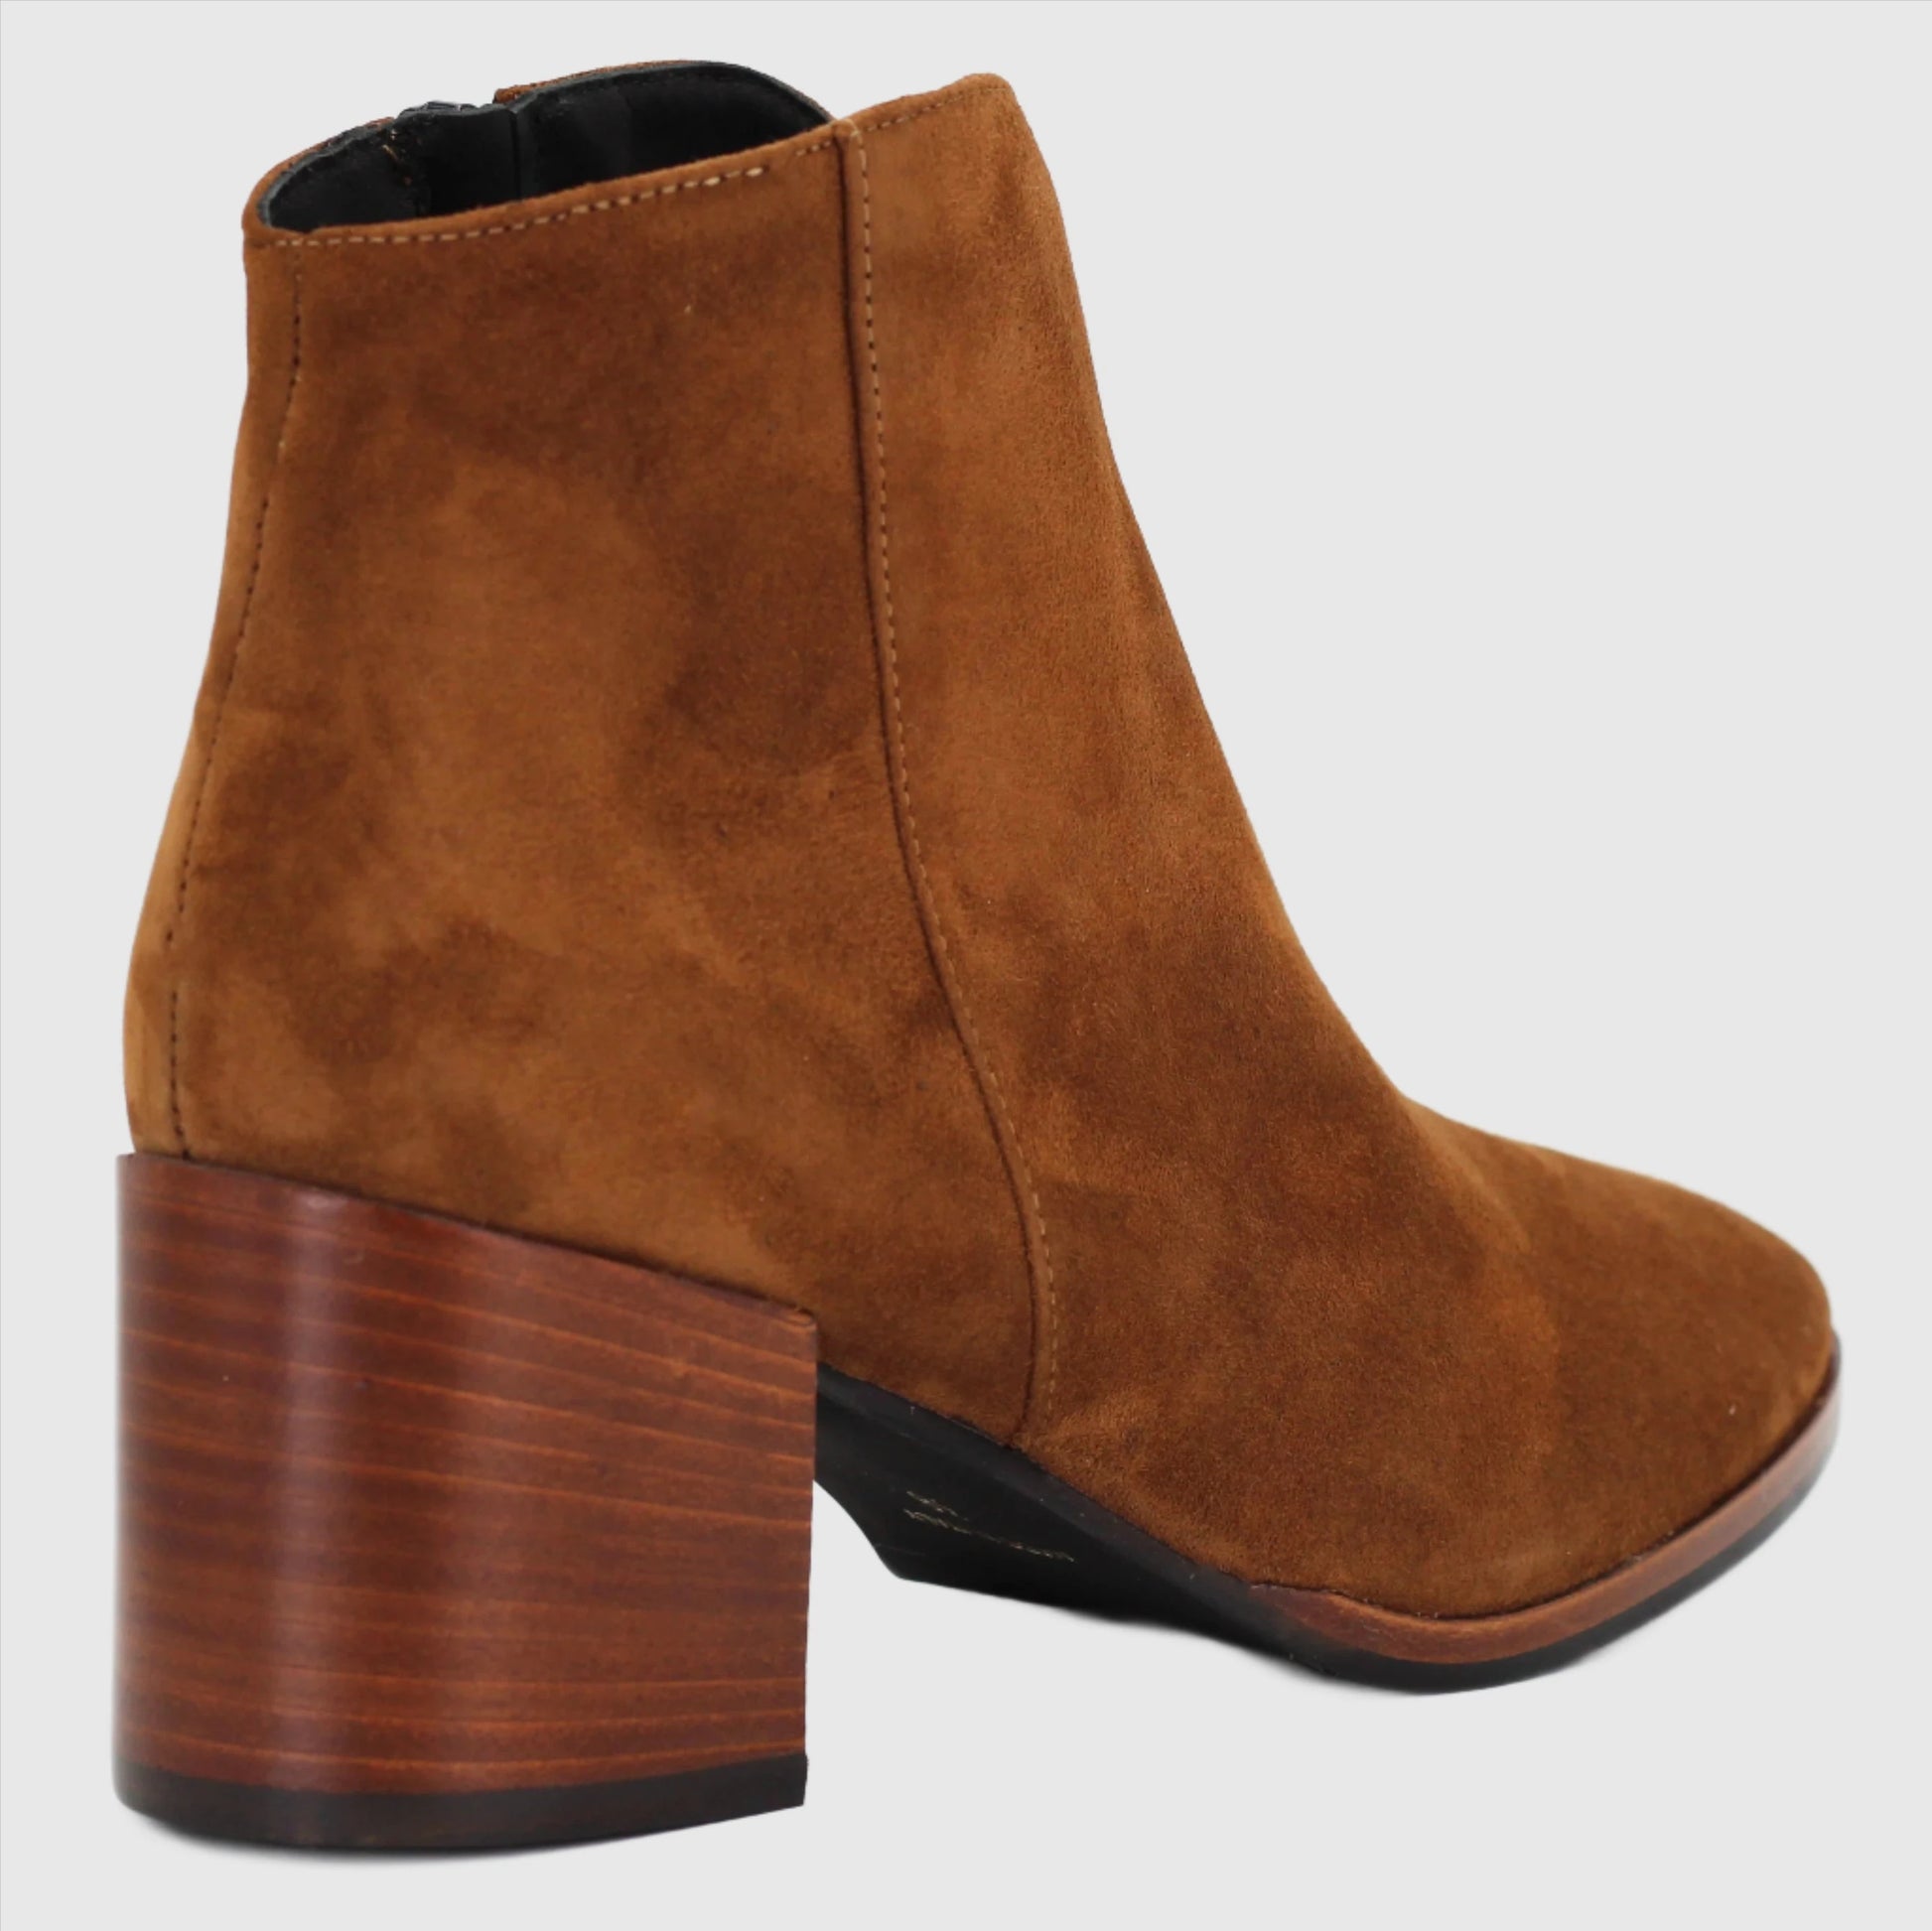 Shop Handmade Italian Leather suede ankle boot in sigaro  (GIOIA7)  or browse our range of hand-made Italian shoes in leather or suede in-store at Aliverti Cape Town, or shop online. We deliver in South Africa & offer multiple payment plans as well as accept multiple safe & secure payment methods.